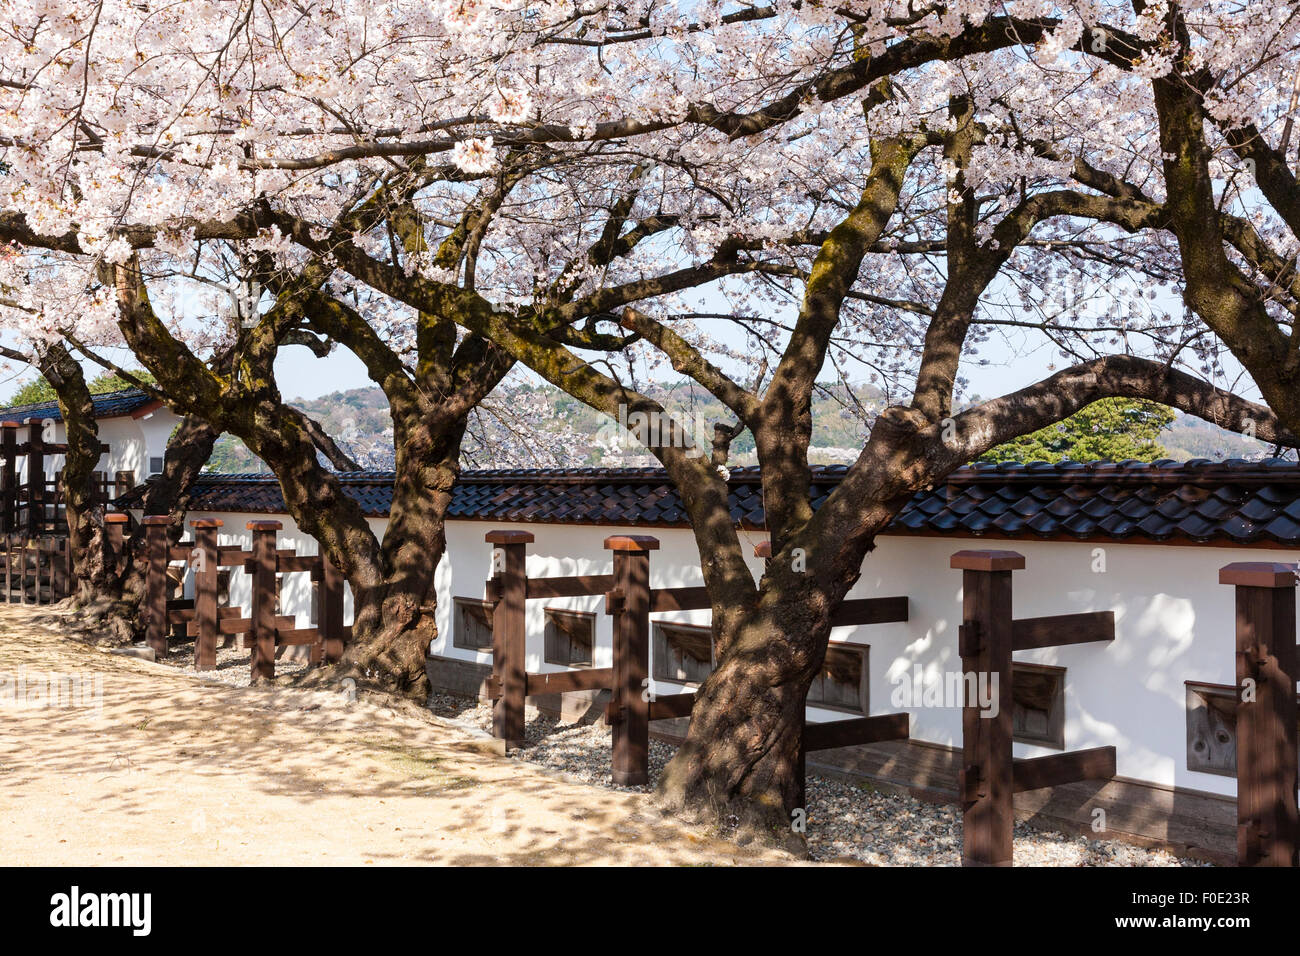 Japan, Kanazawa. Castle. Reconstructed Dobei wood and white plaster roofed wall with firing slots under flowering cherry blossoms trees. Springtime. Stock Photo